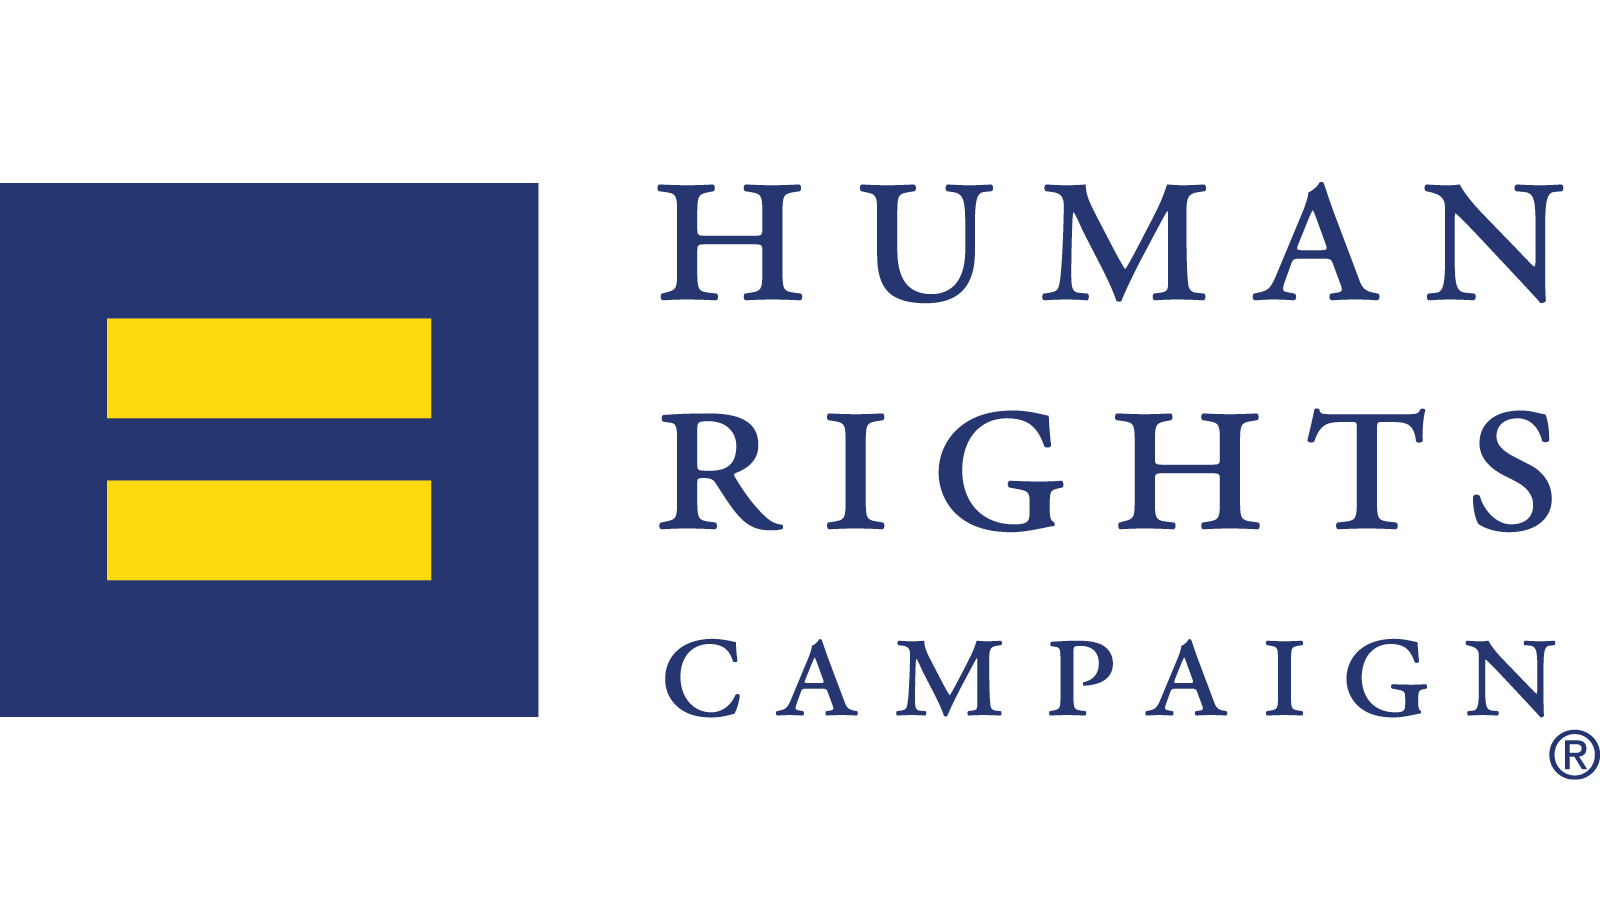 HRC Logo - HRC Officially Adopts Use of “LGBTQ”. Human Rights Campaign